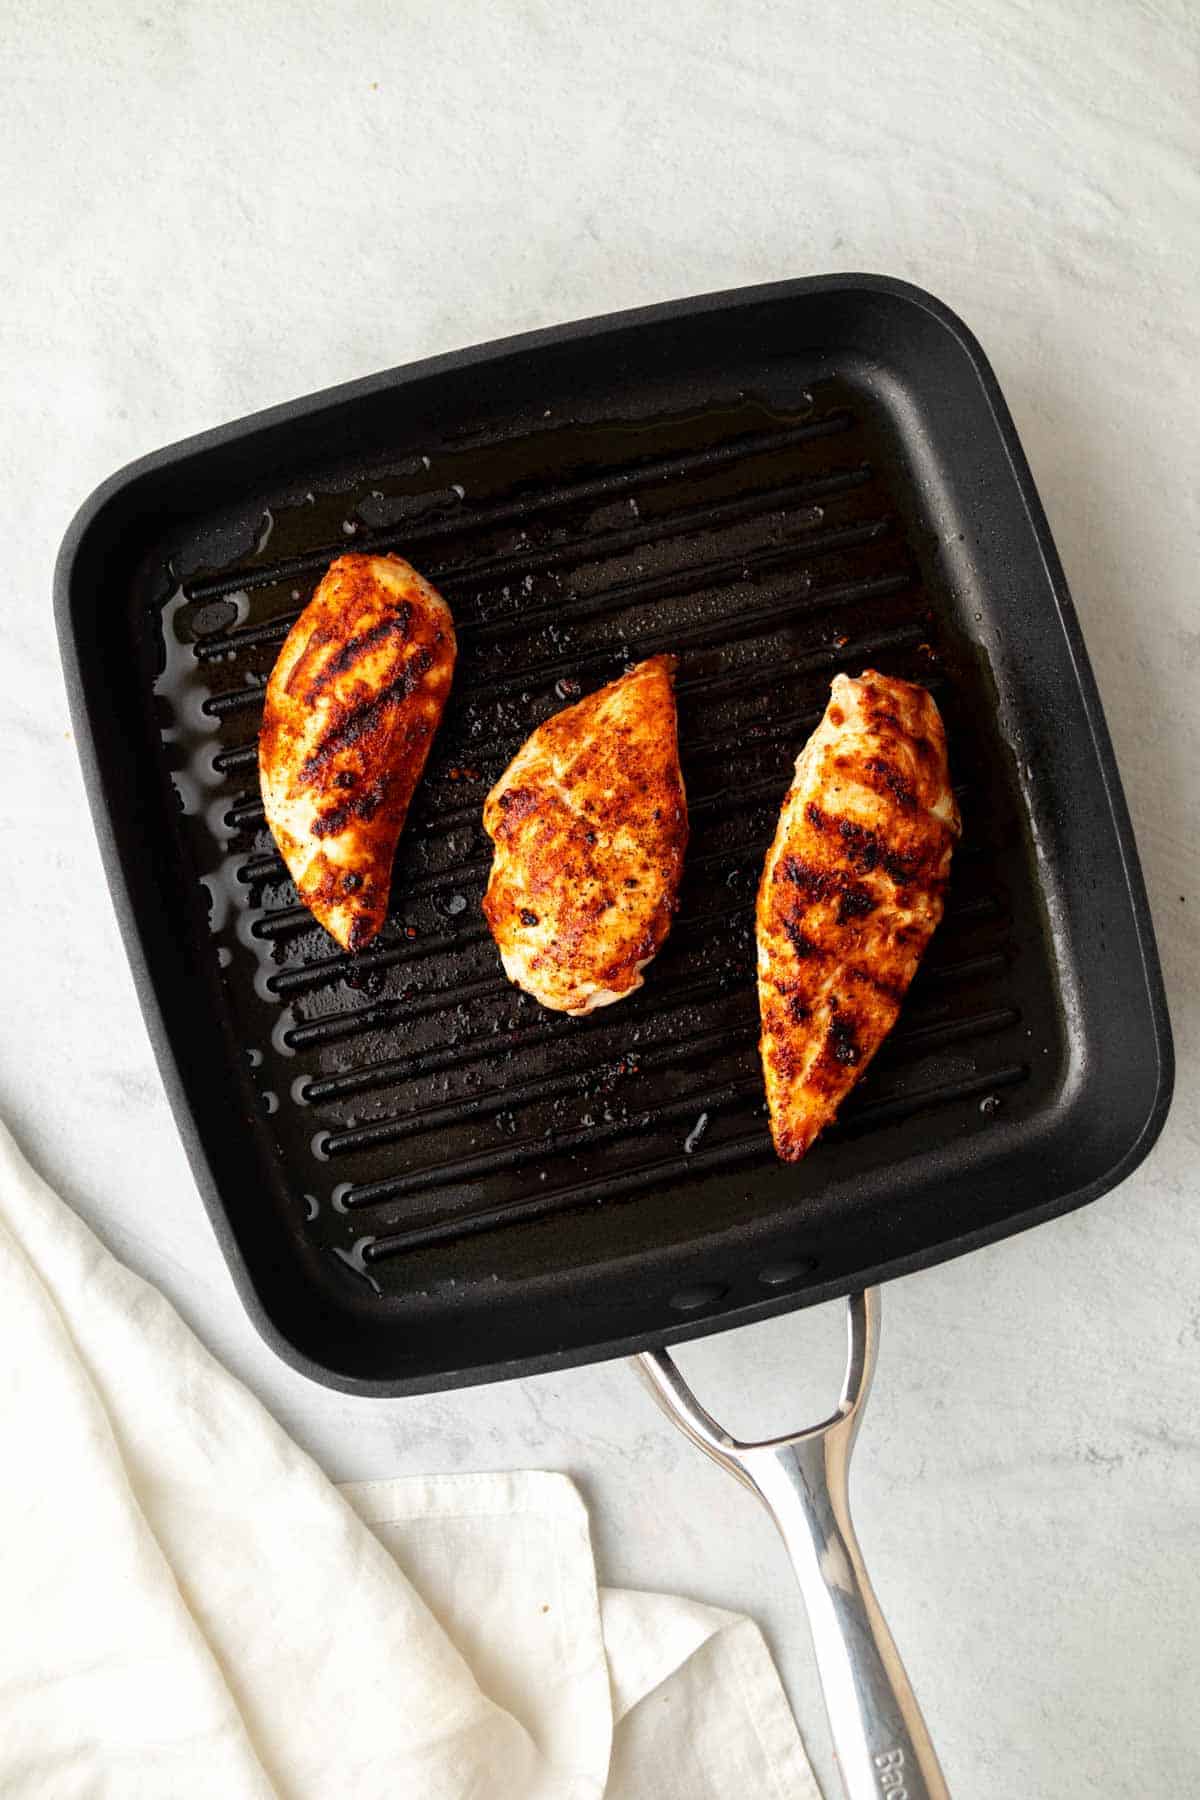 Three chicken breasts cooking on a grill pan, as seen from above